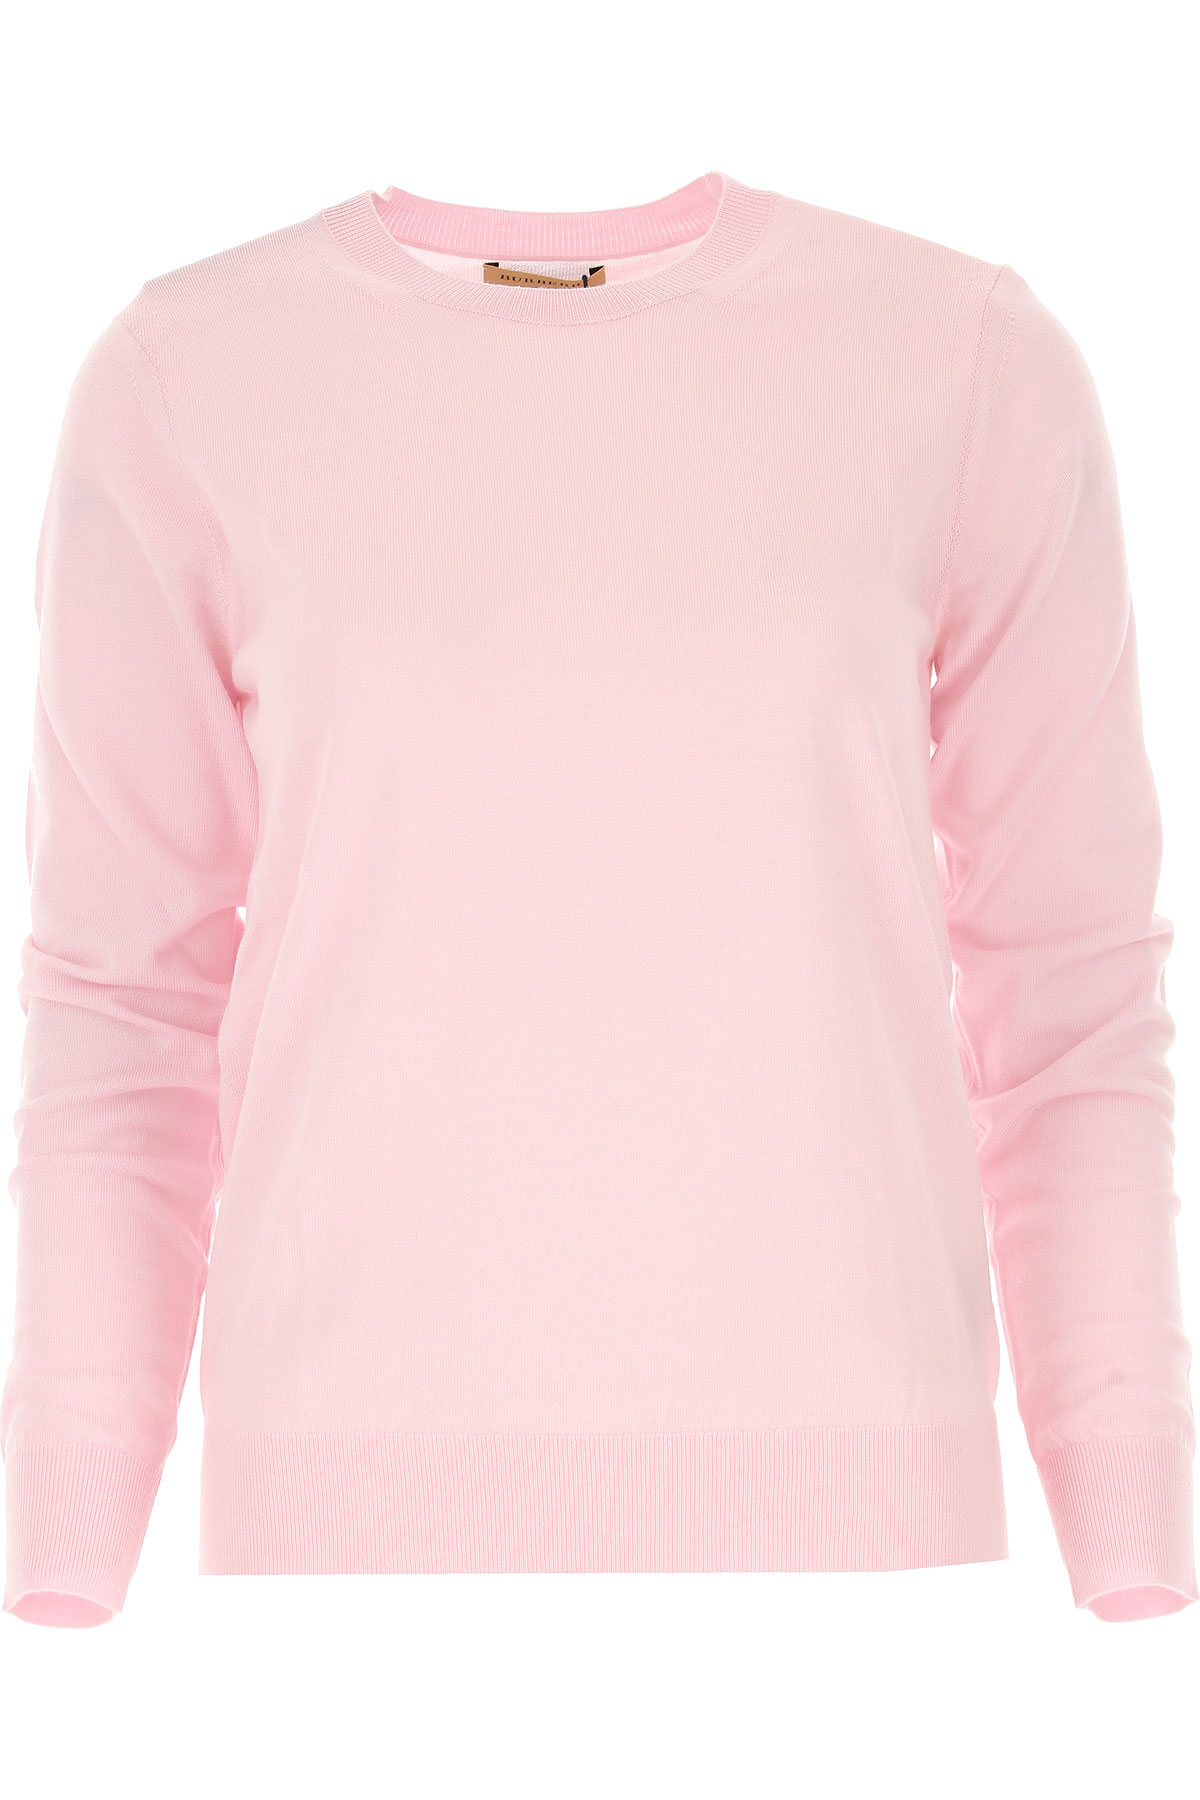 burberry sweater womens pink